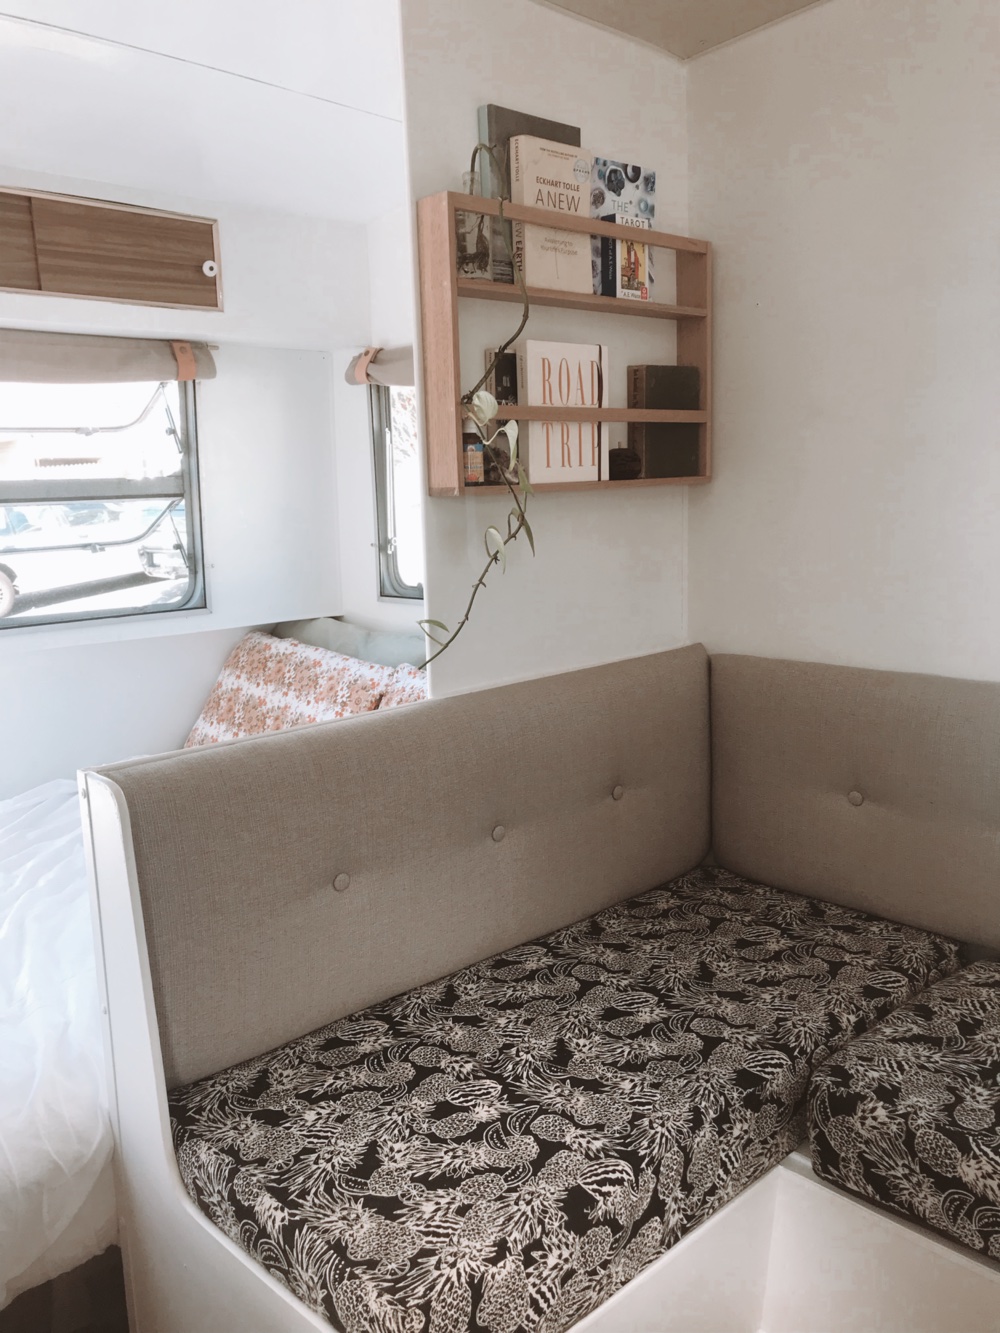 Lounge corner in a renovated travel trailer showing small shelves above the sofa.